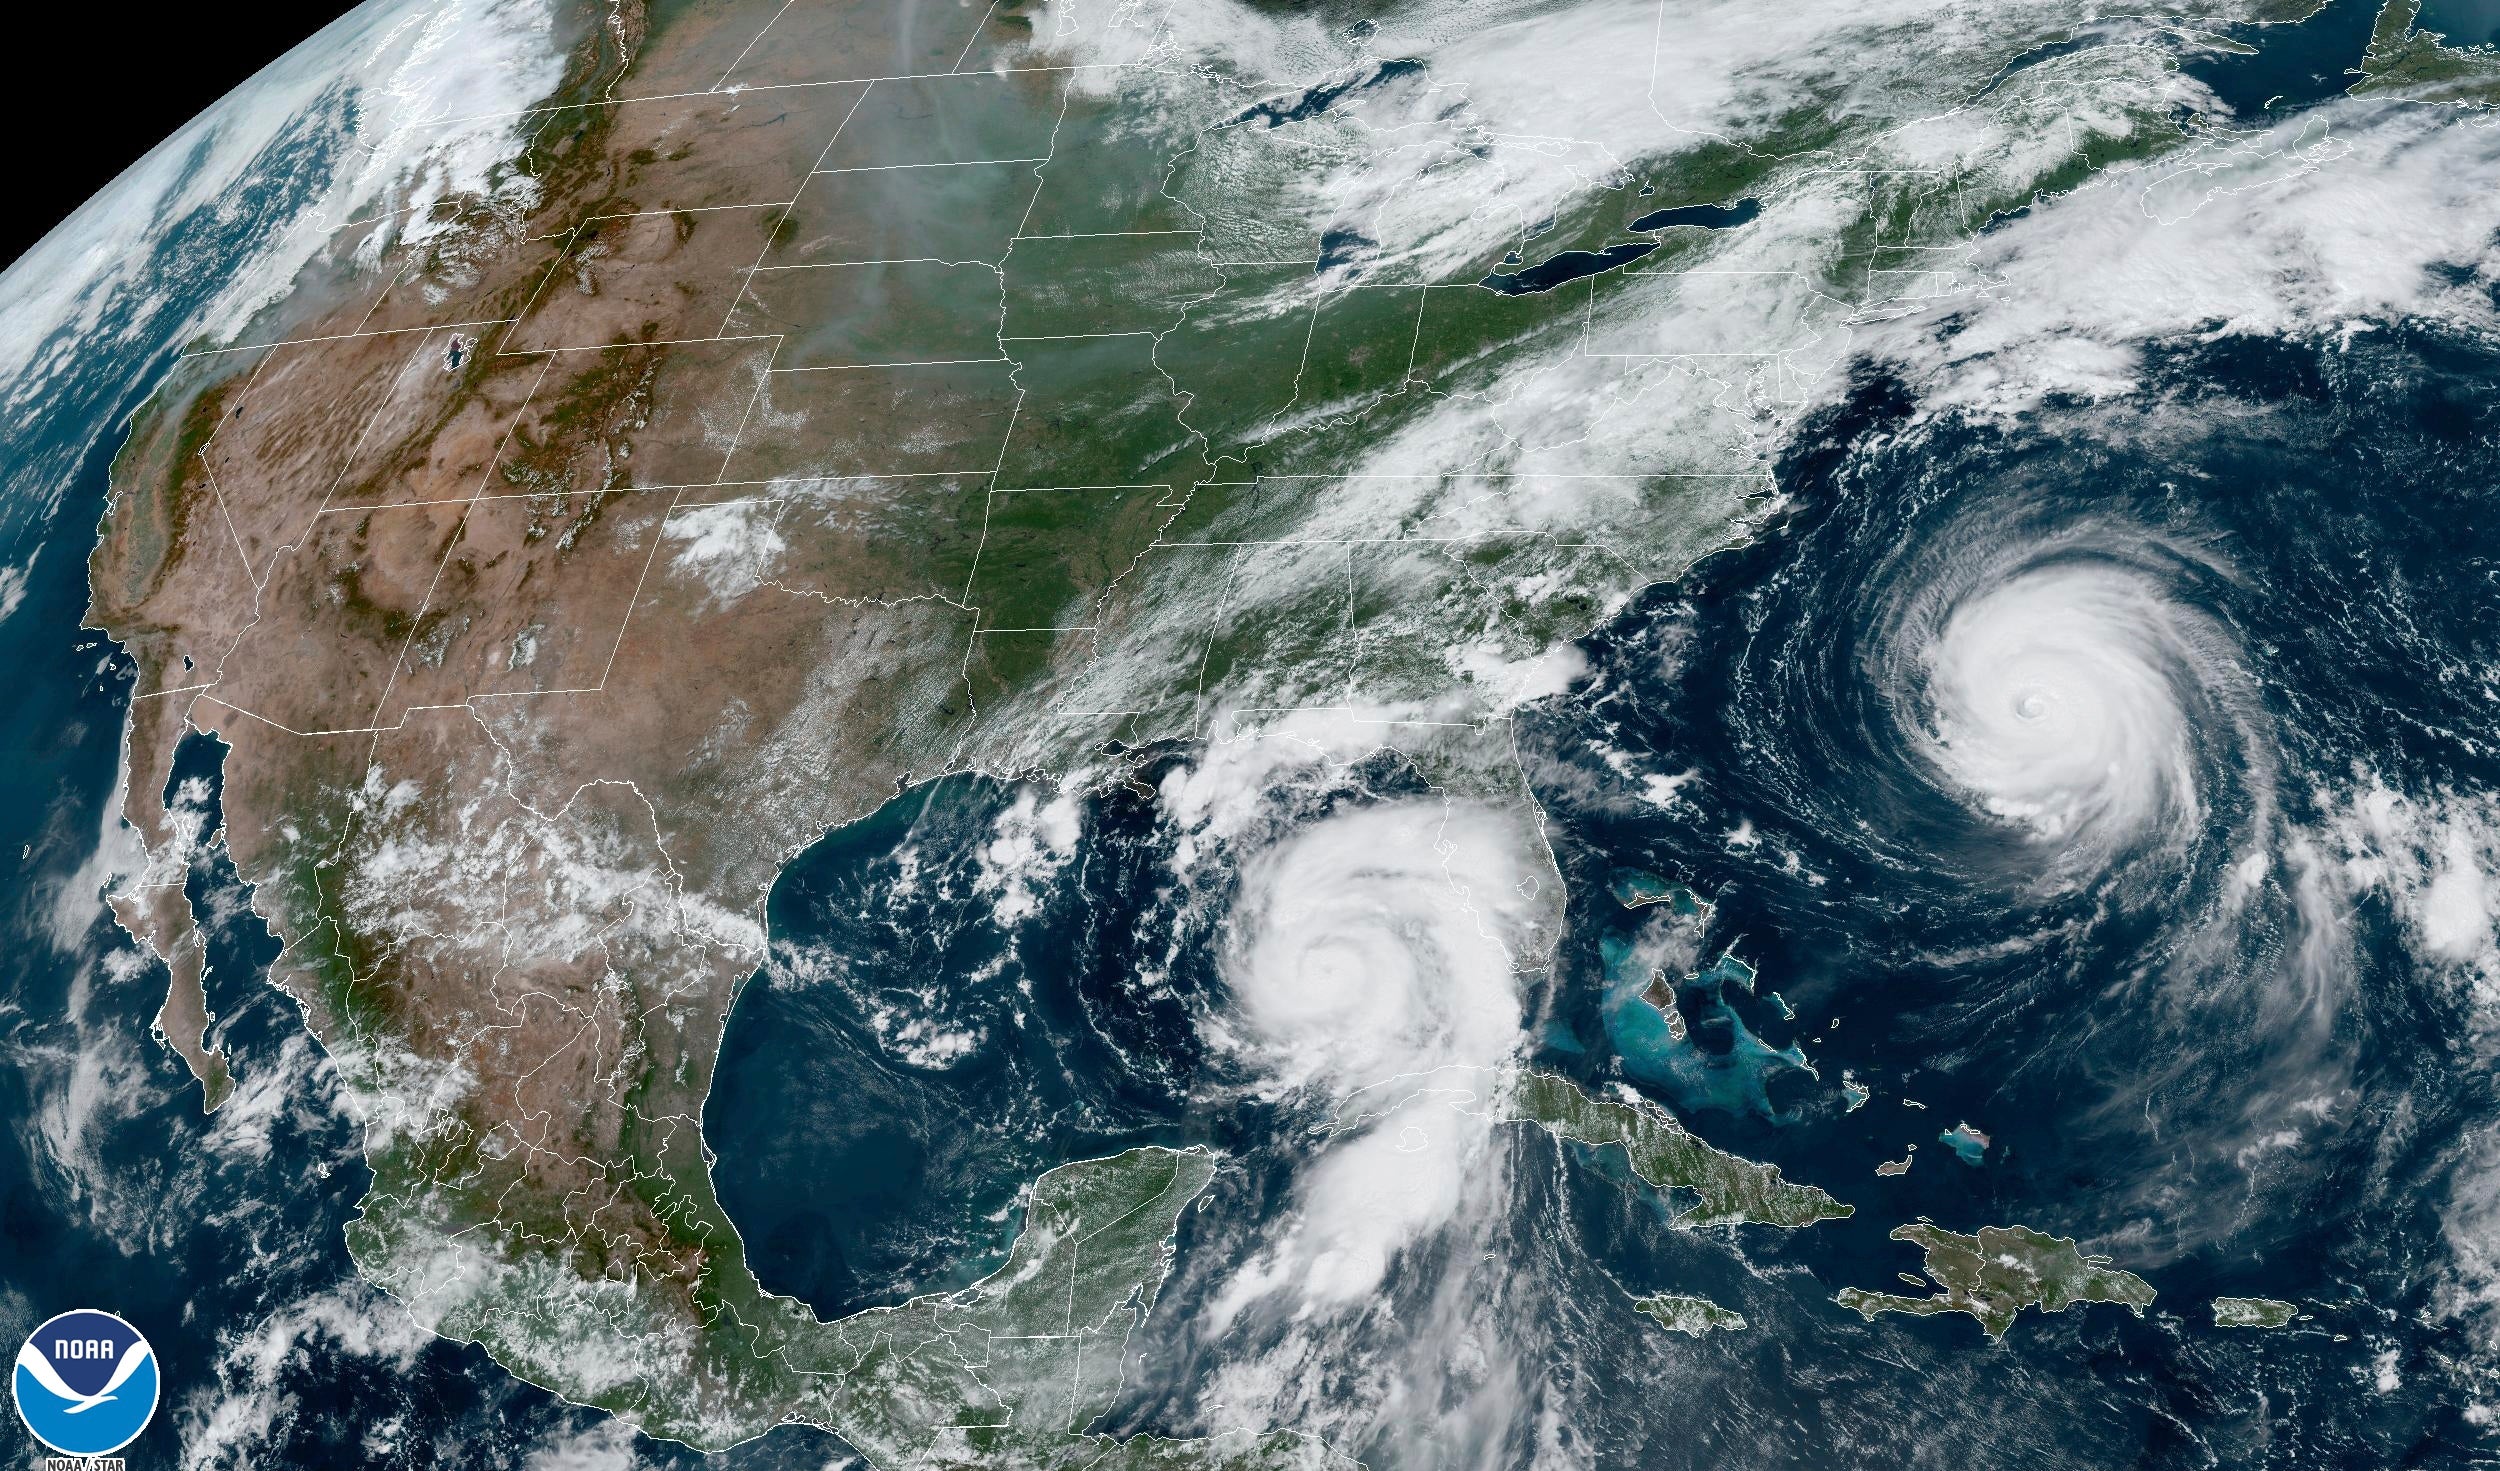 This Tuesday, Aug. 29, 2023, 1:31 p.m. EDT satellite image provided by the National Oceanic and Atmospheric Administration shows Hurricane Idalia, center, approaching Florida's Gulf Coast, and Hurricane Franklin, right, as it moves along the East Coast of the United States, southwest of Bermuda.